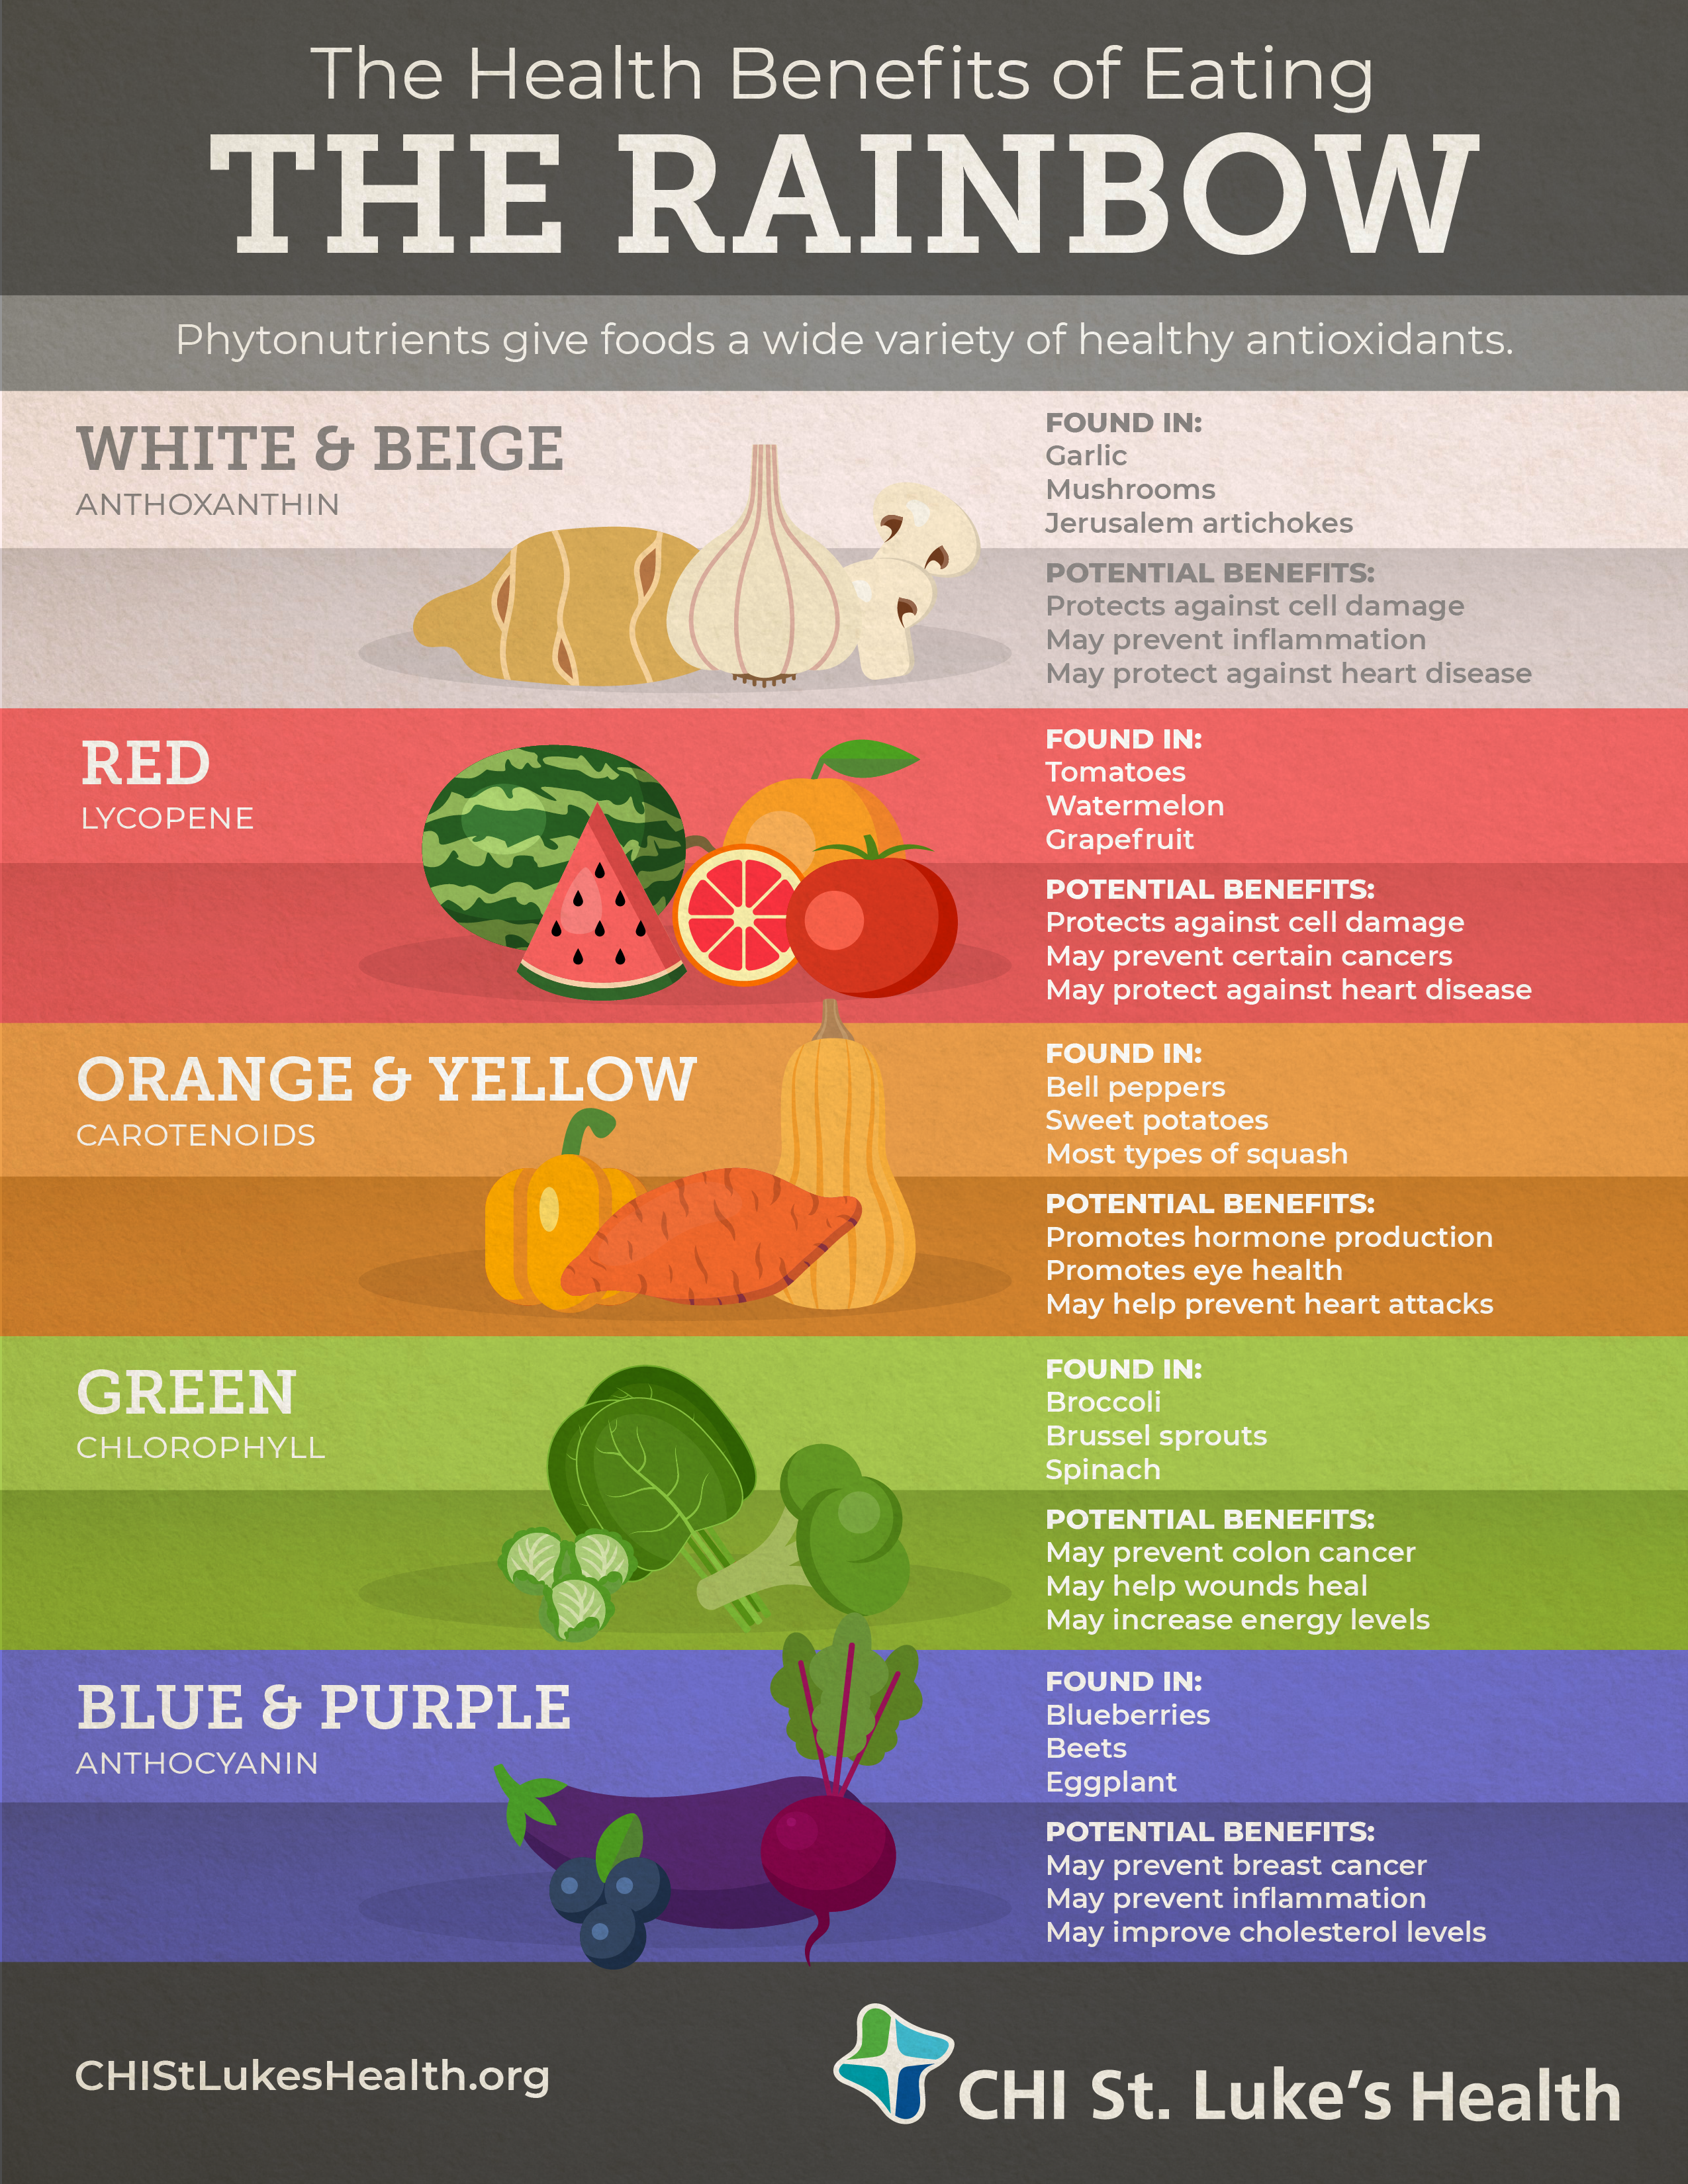 An infographic shows the fruits and vegetables divided by color and tells about their health benefits.